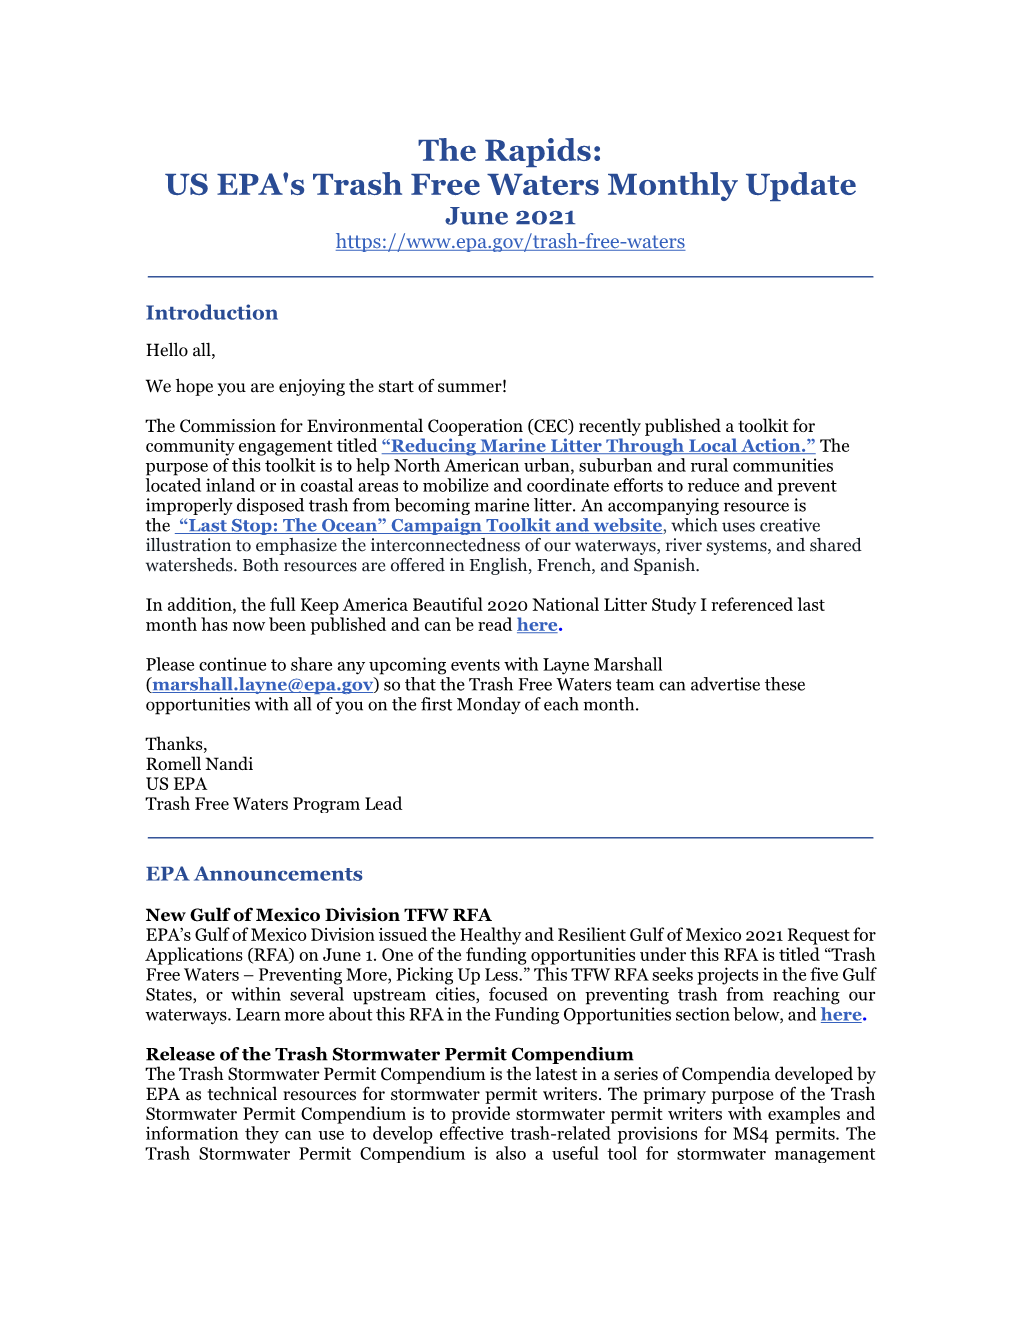 The Rapids: US EPA's Trash Free Waters Monthly Update June 2021